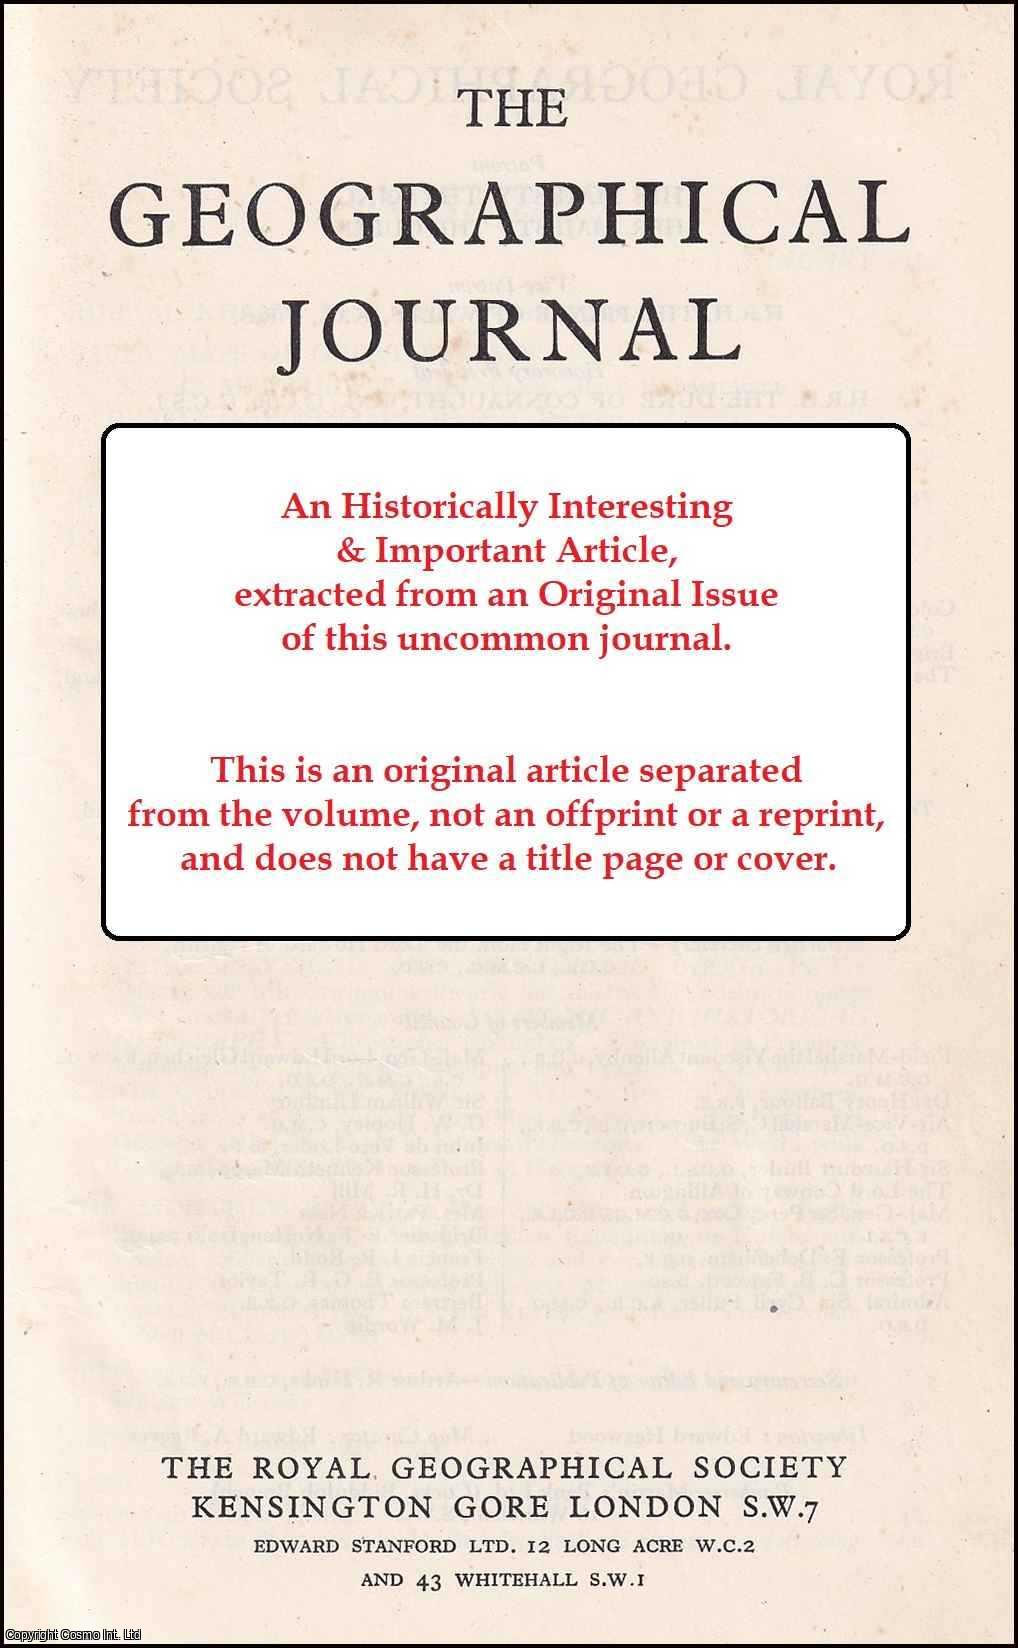 R. N. E. Blake - The Impact of Airfields on The British Landscape. An original article from the Geographical Journal, 1969.